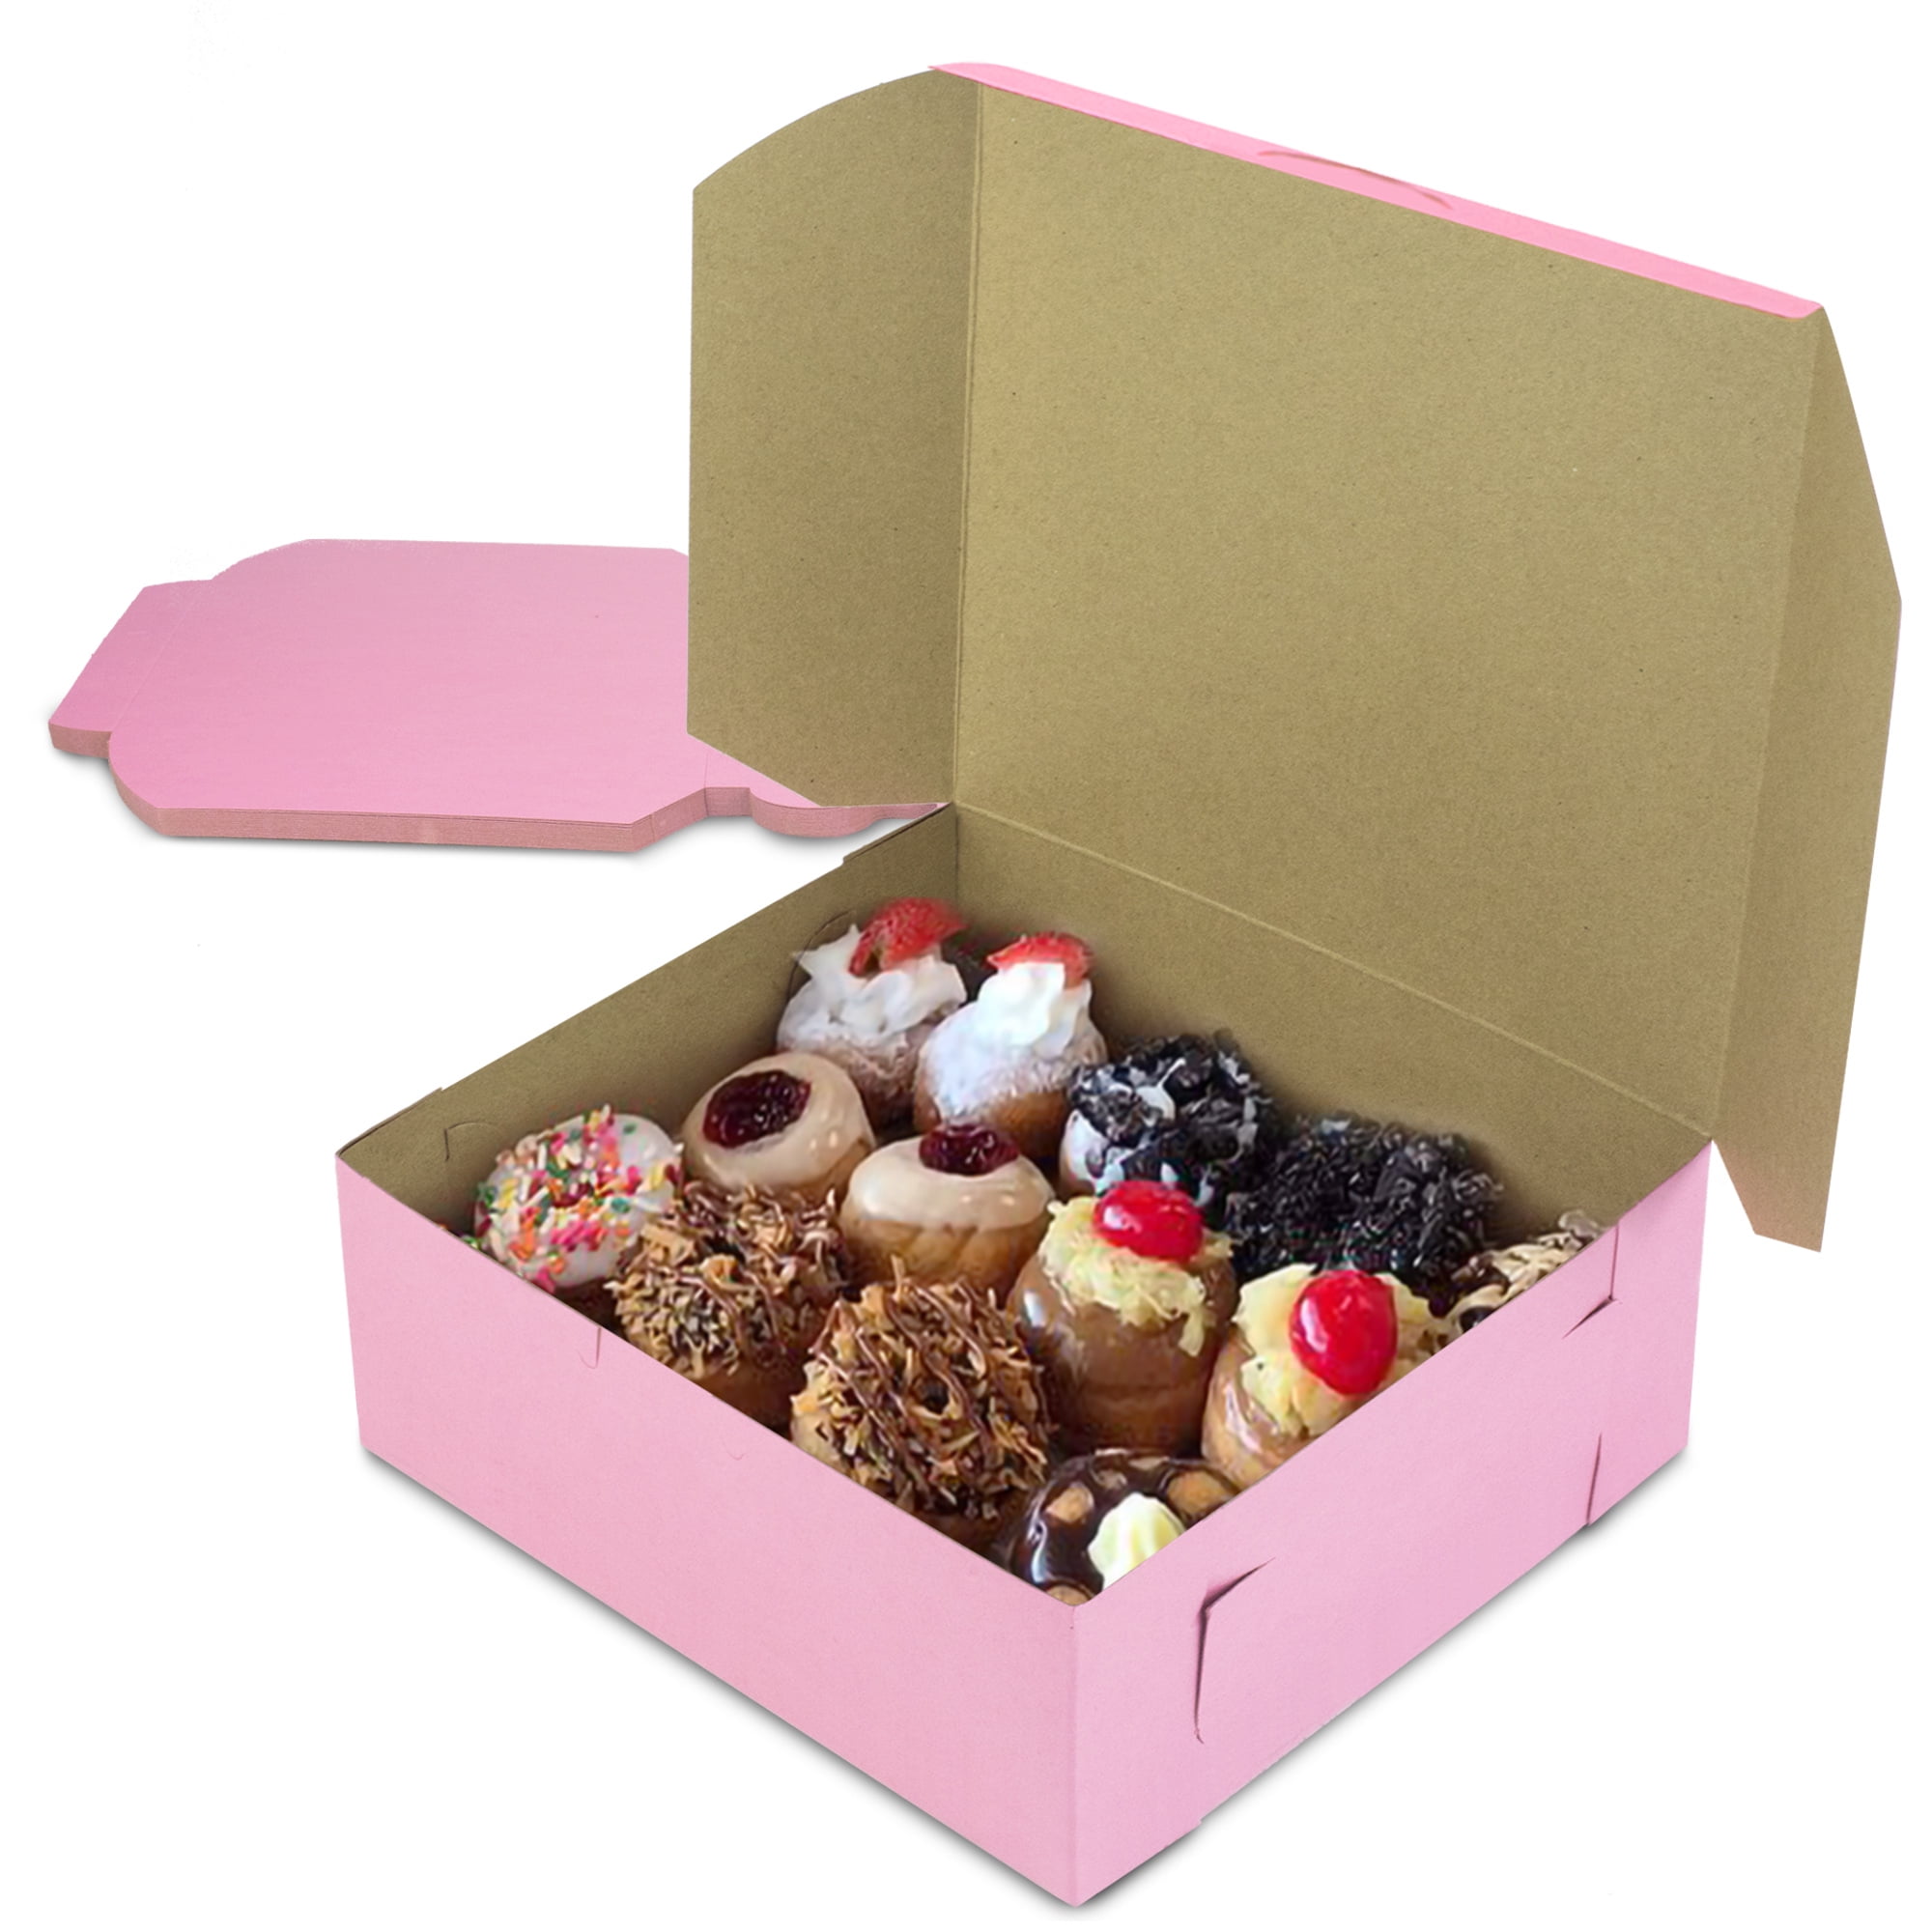 25 Cupcake Box holds 6 each PINK 10 x 10 x 4 Bakery Box and Inserts for 150 